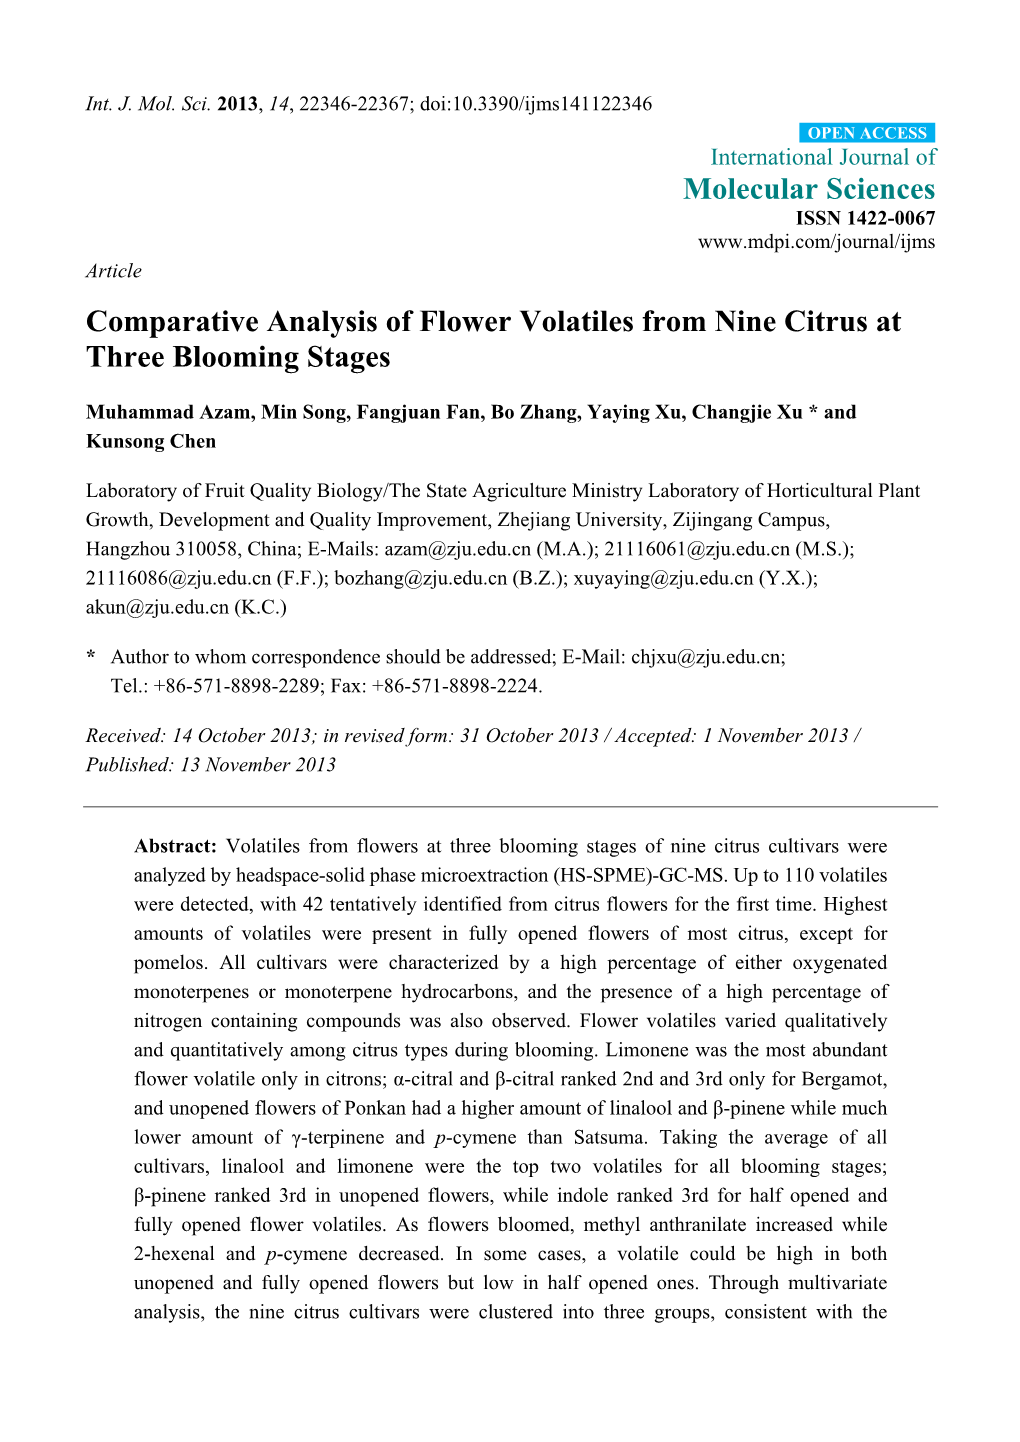 Comparative Analysis of Flower Volatiles from Nine Citrus at Three Blooming Stages